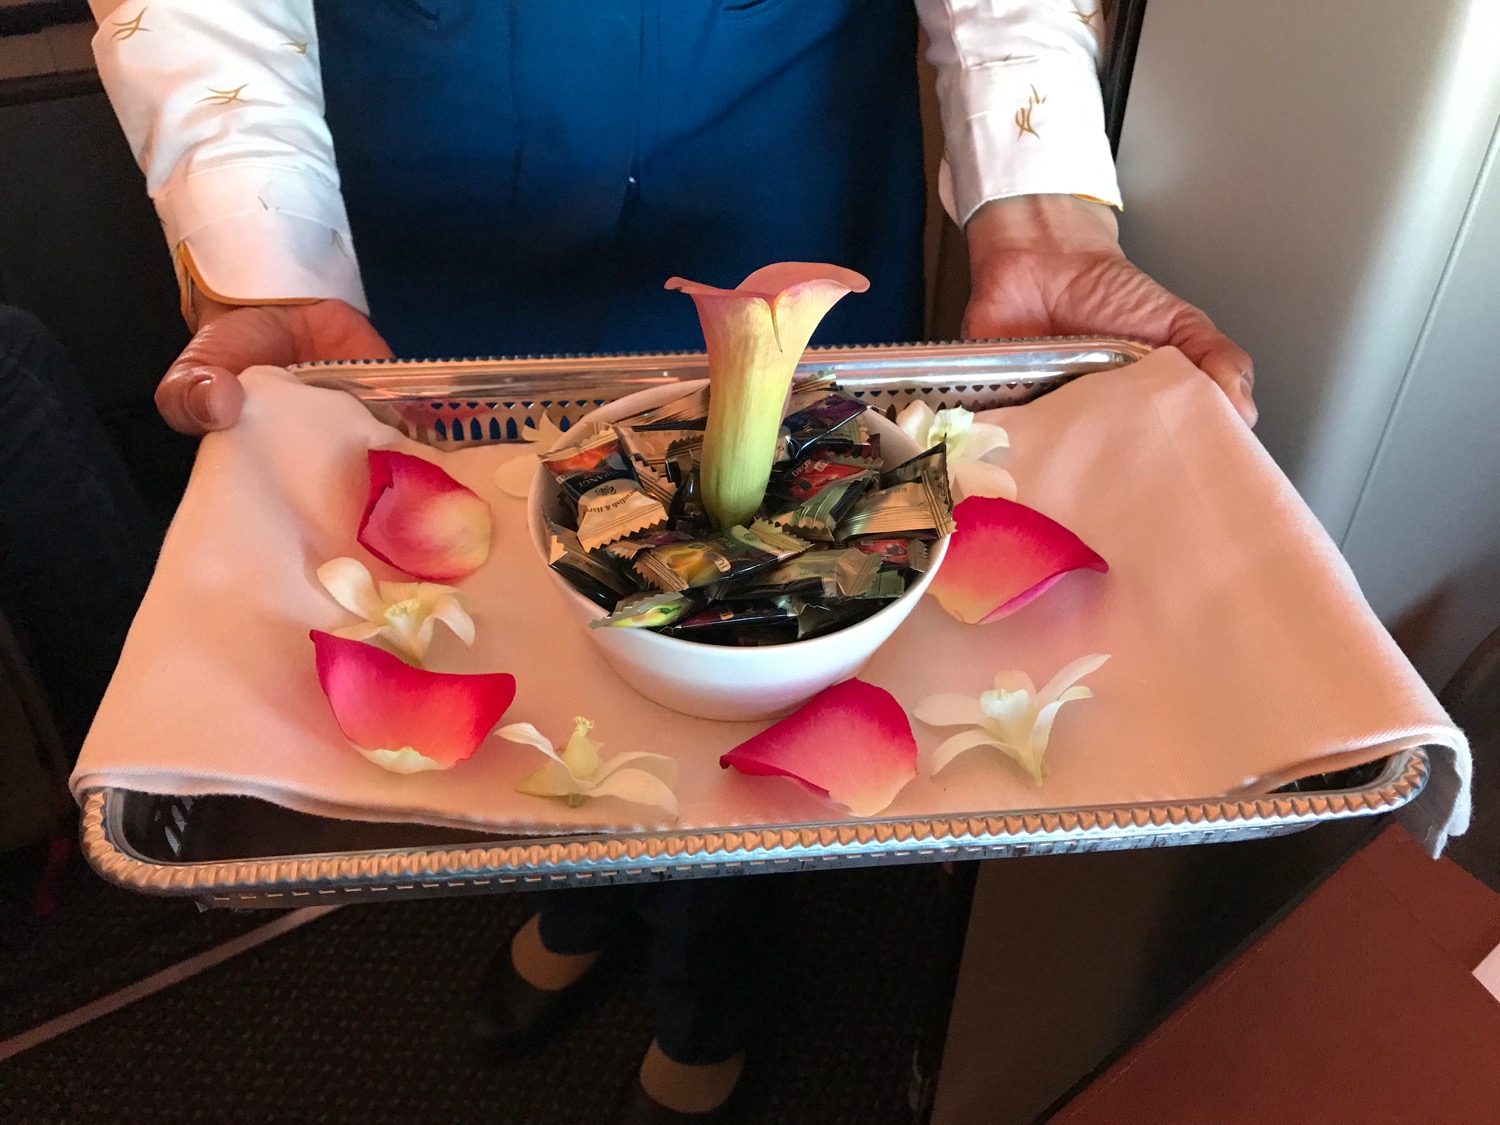 person holding a tray with food and flowers